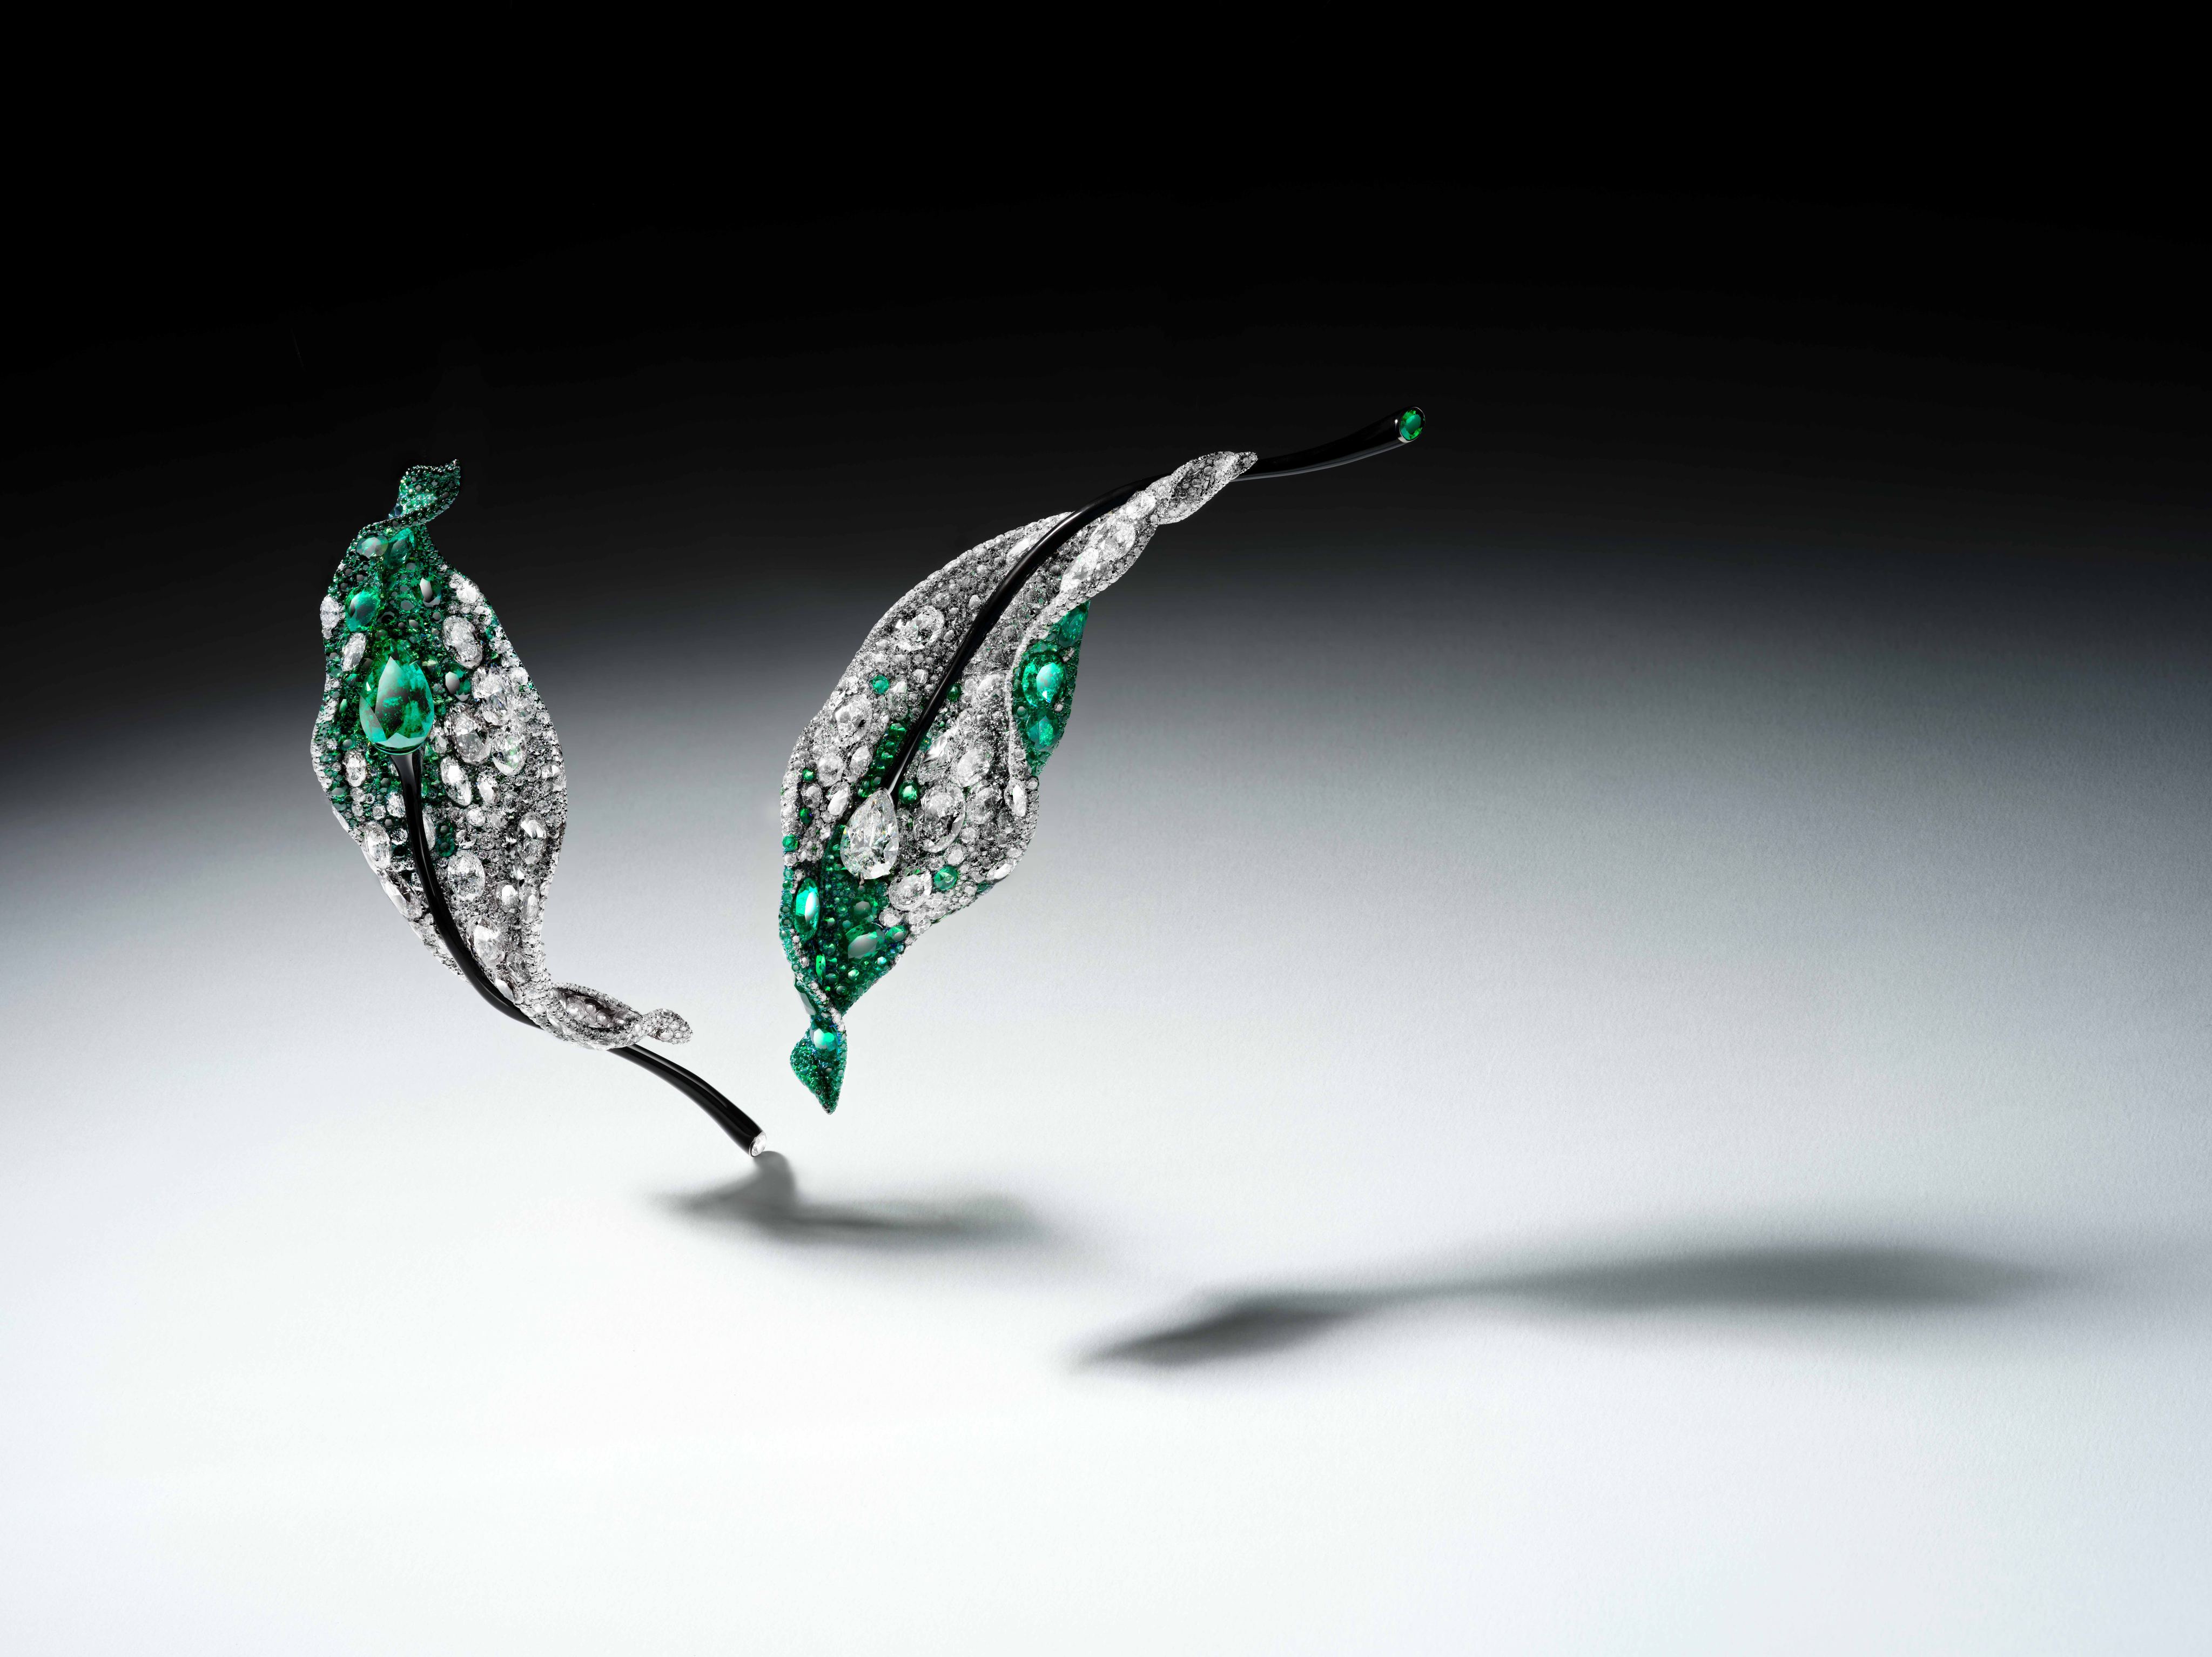 The Spring brooch from Cindy Chao’s Four Seasons collection is an example of how today’s high jewellers are using ancient techniques as well as unorthodox materials to craft their pieces. Photos: Handout